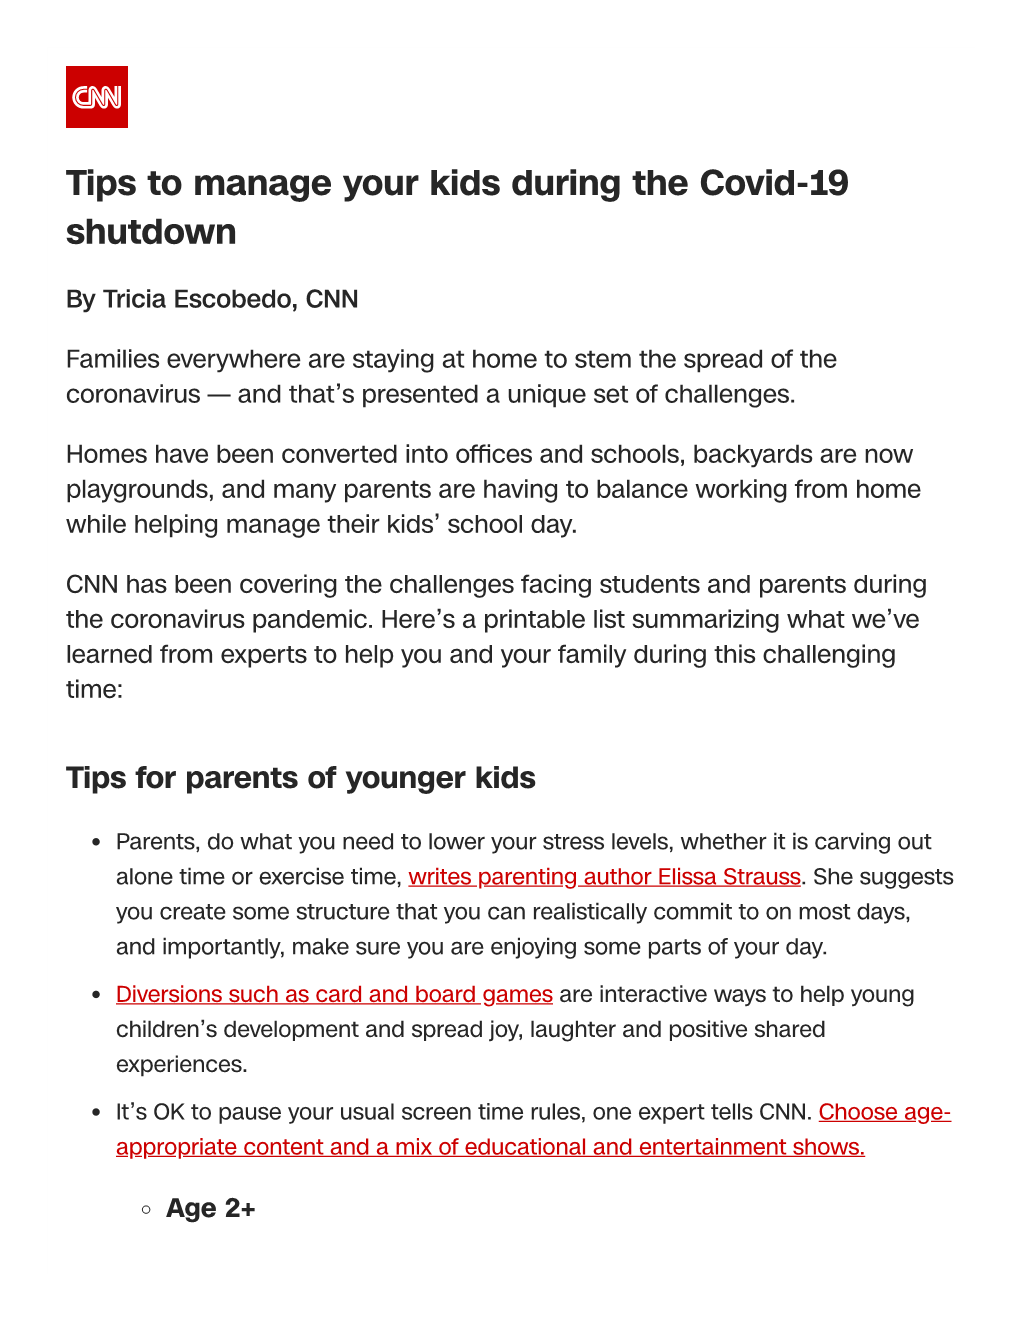 Tips to Manage Your Kids During the Covid-19 Shutdown